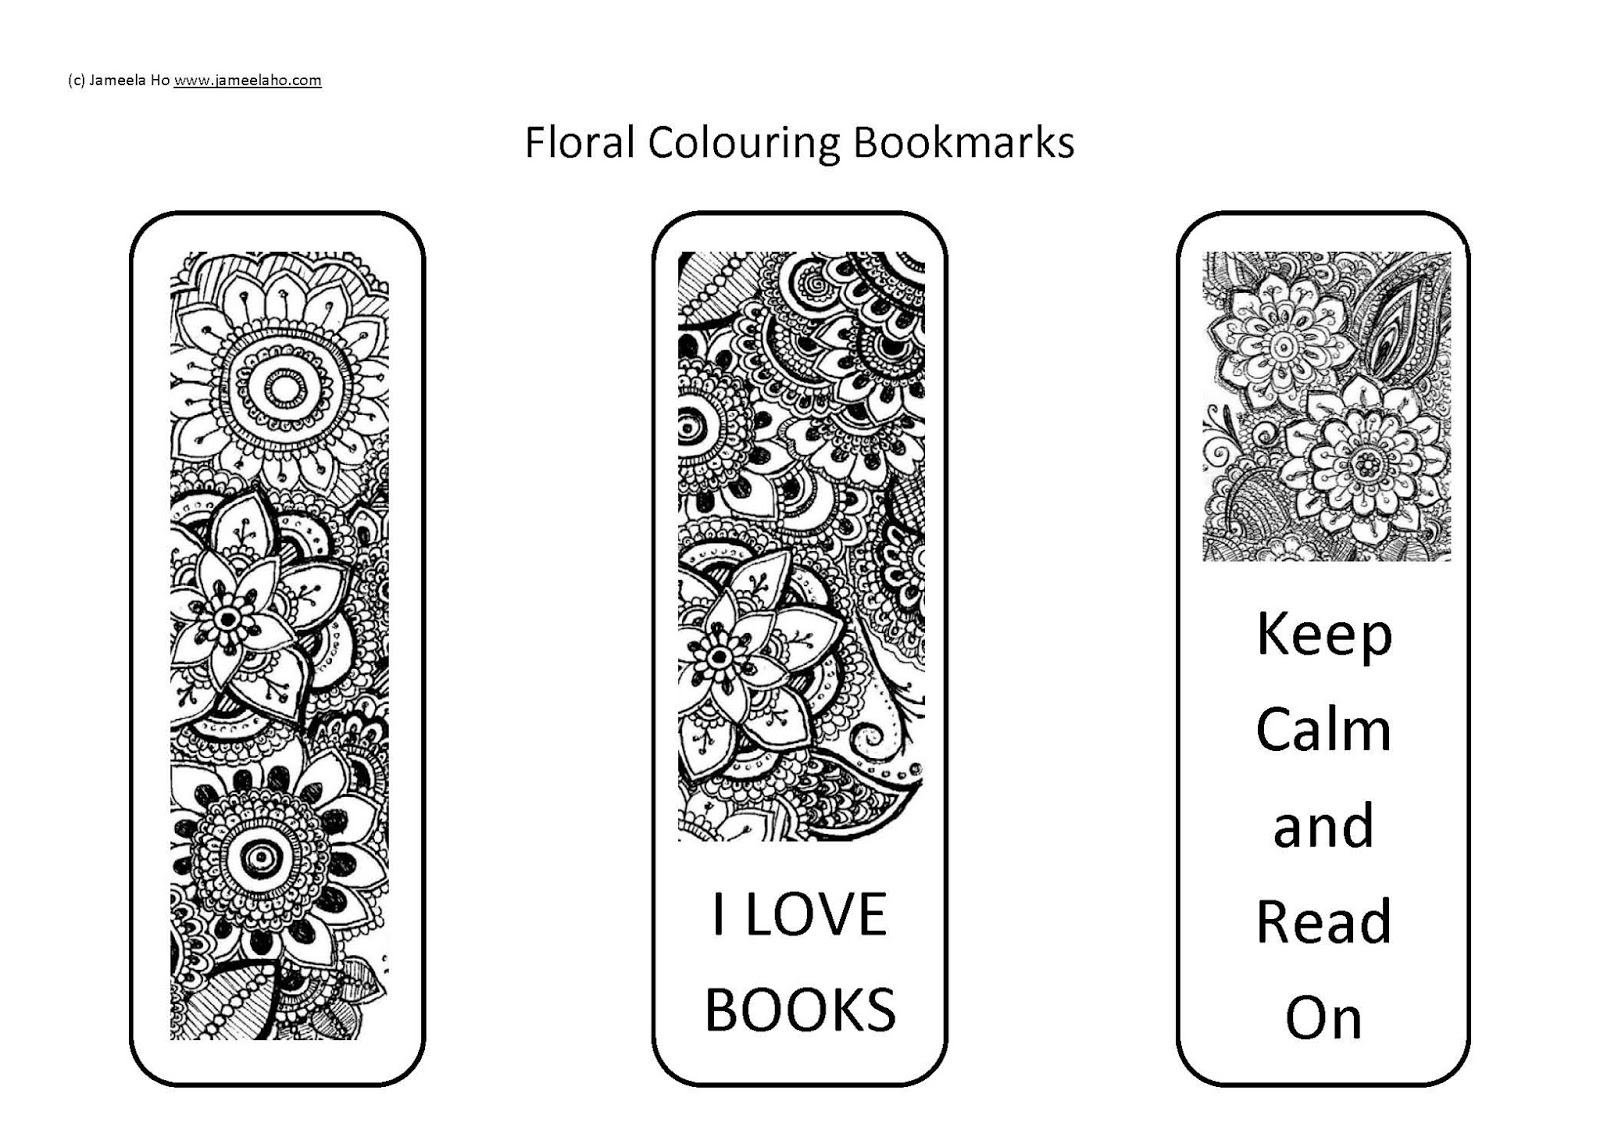 Redbubble bookmarks